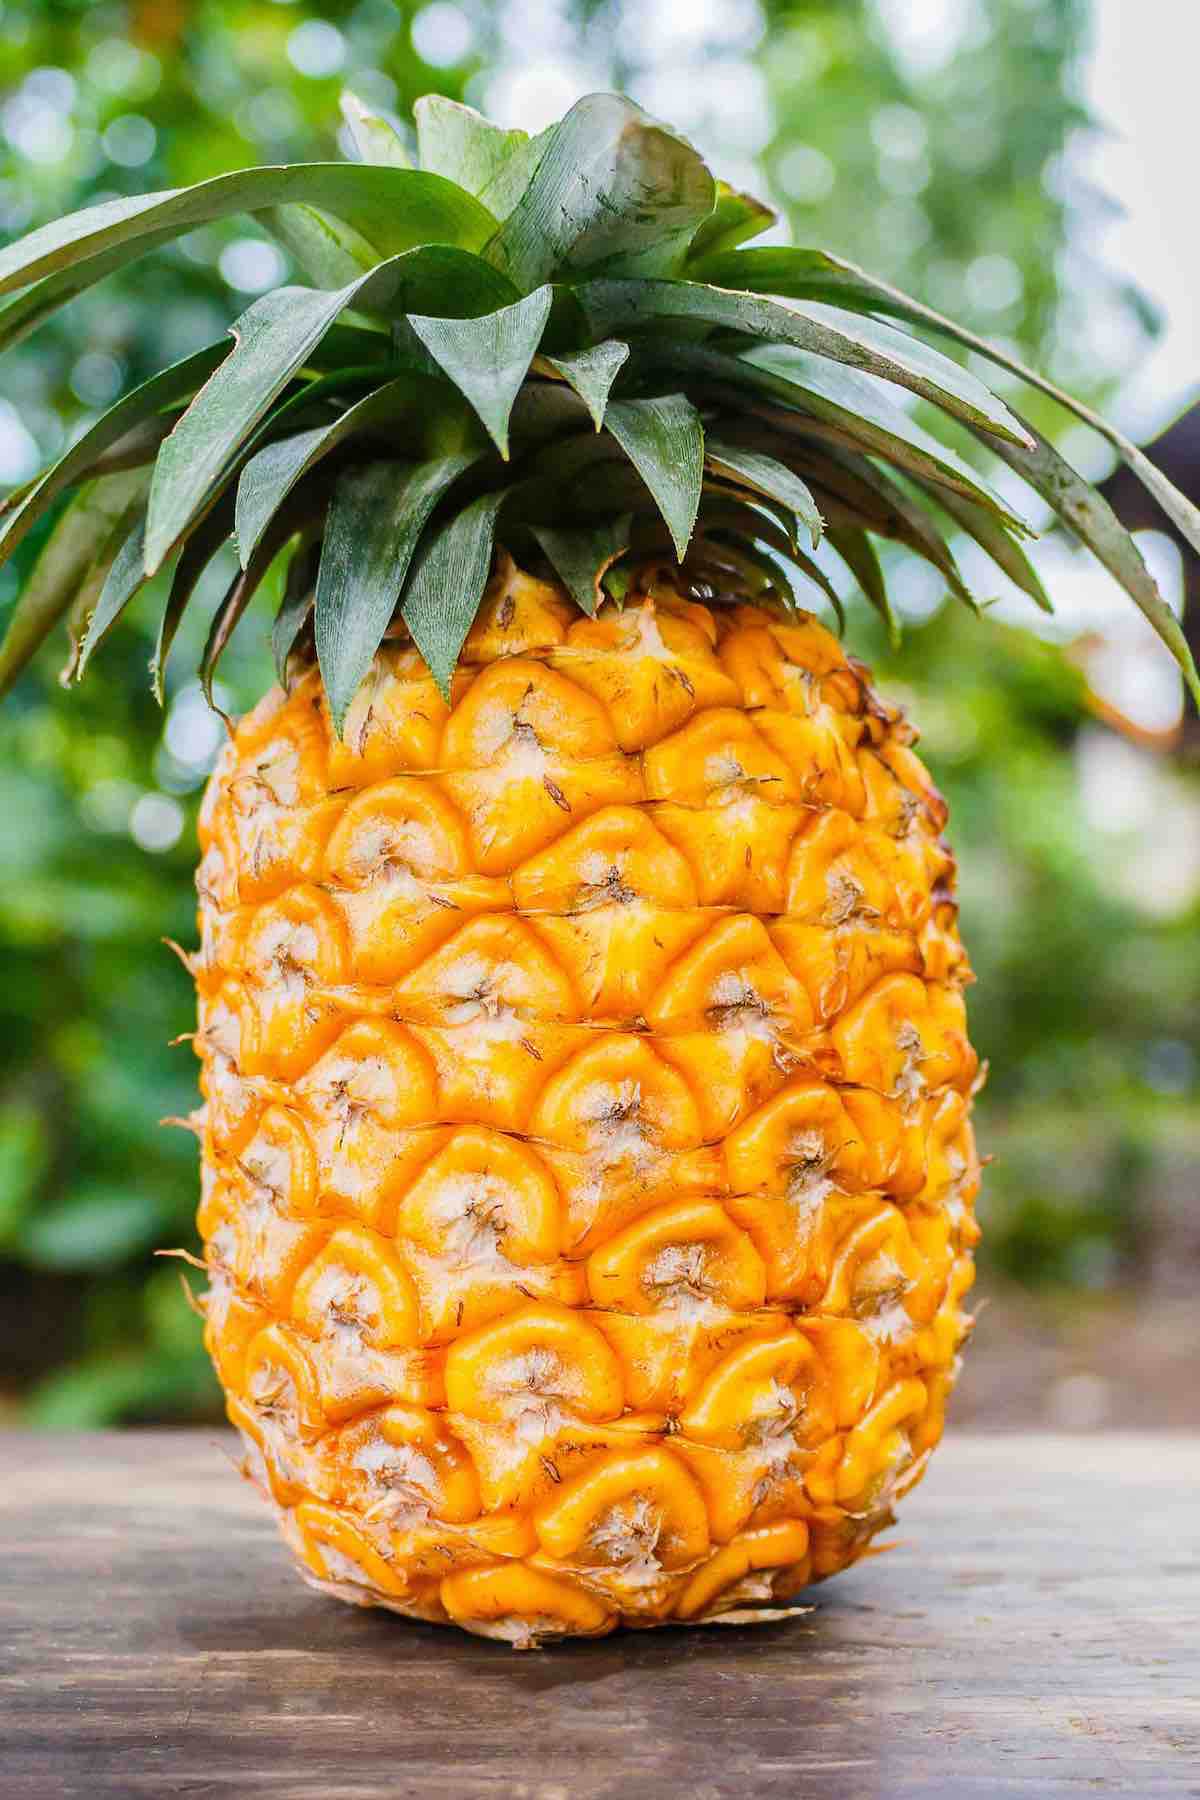 A perfectly ripe pineapple with golden colored skin